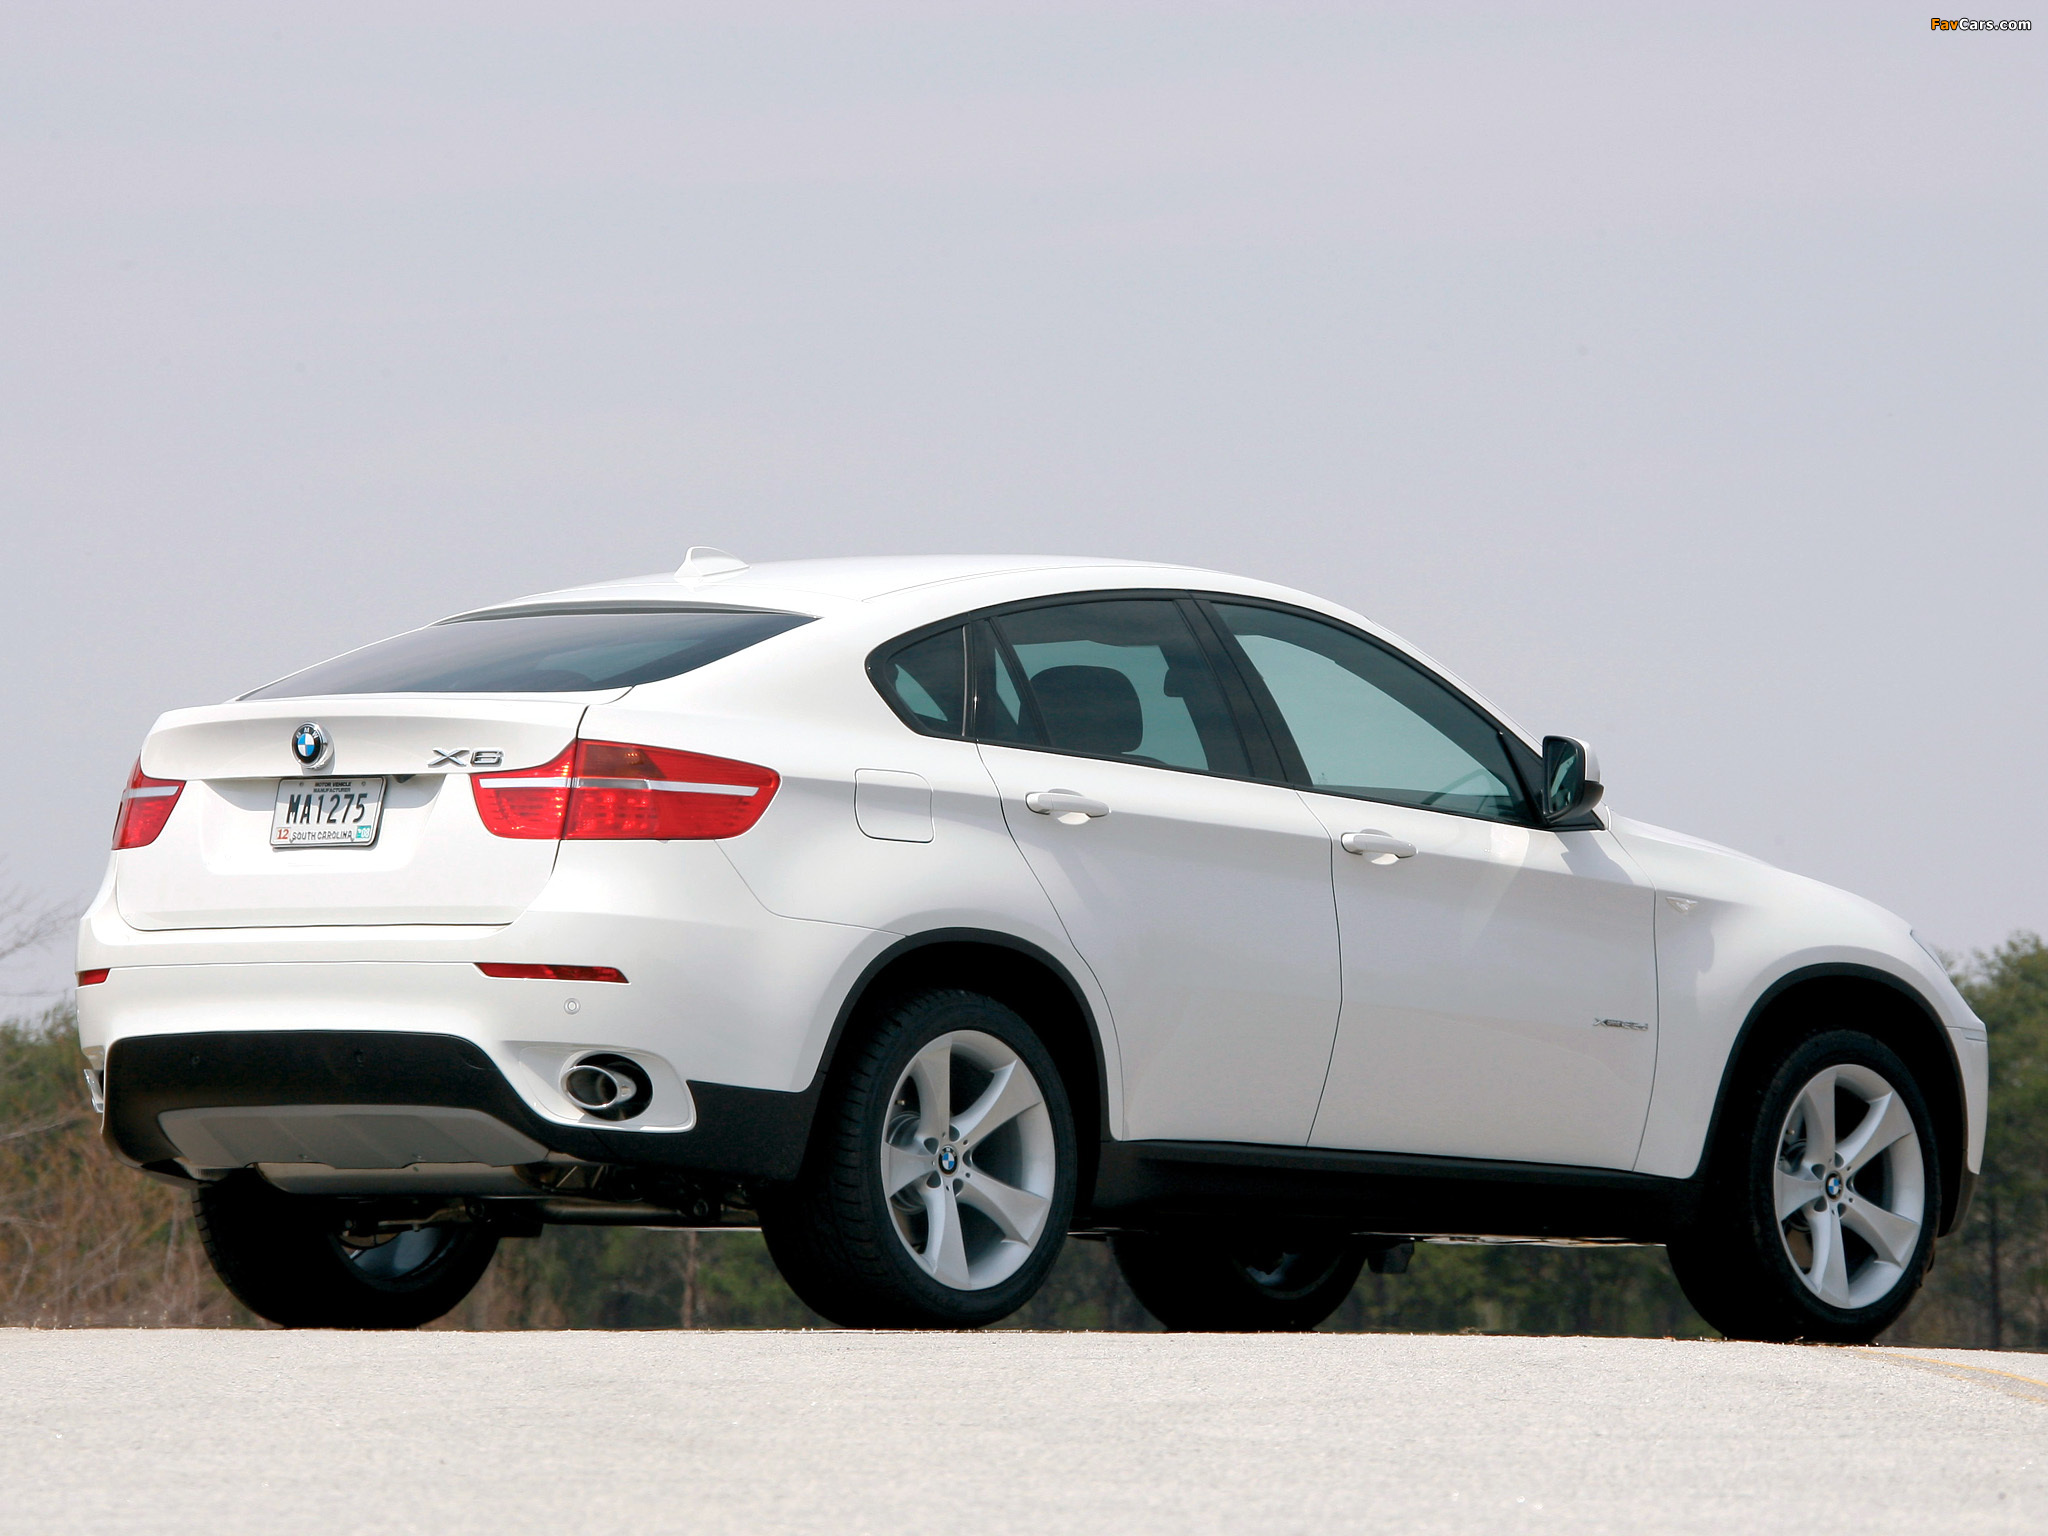 BMW X6 xDrive35d (71) 2008 pictures (2048 x 1536)